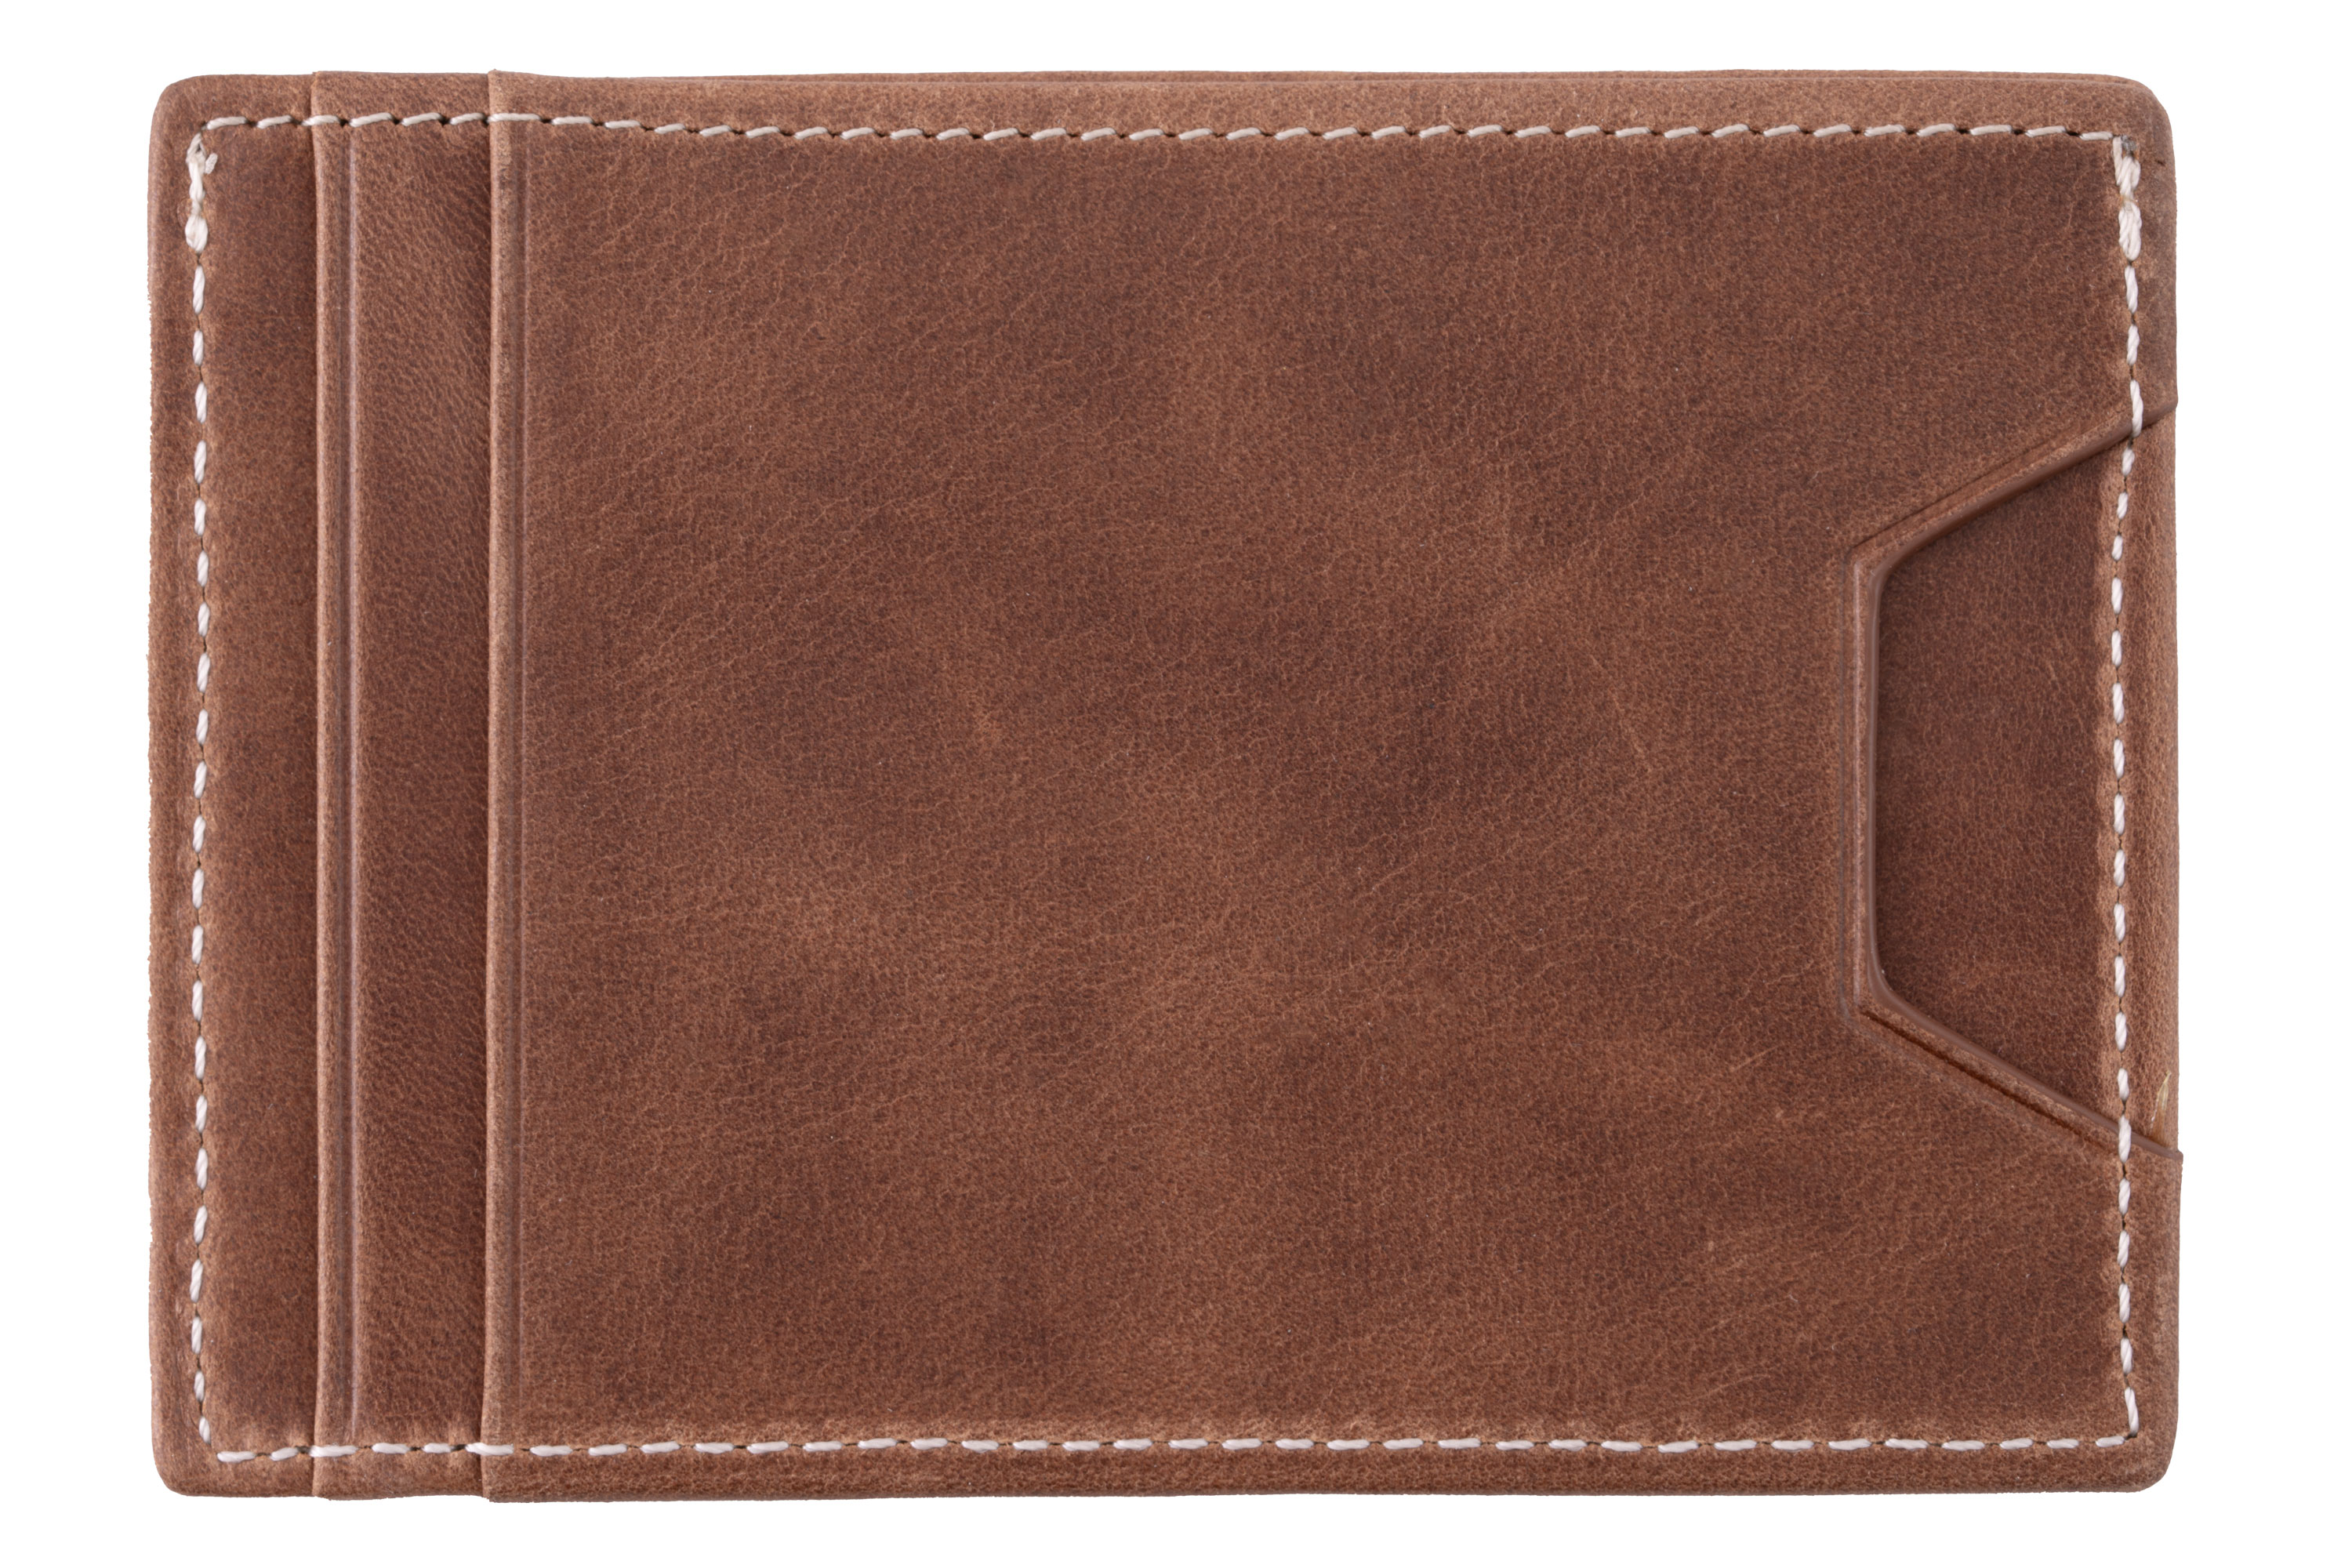 Four Card Carrier Slim Wallet in Saddle Brown Montecristo Leather back view. 